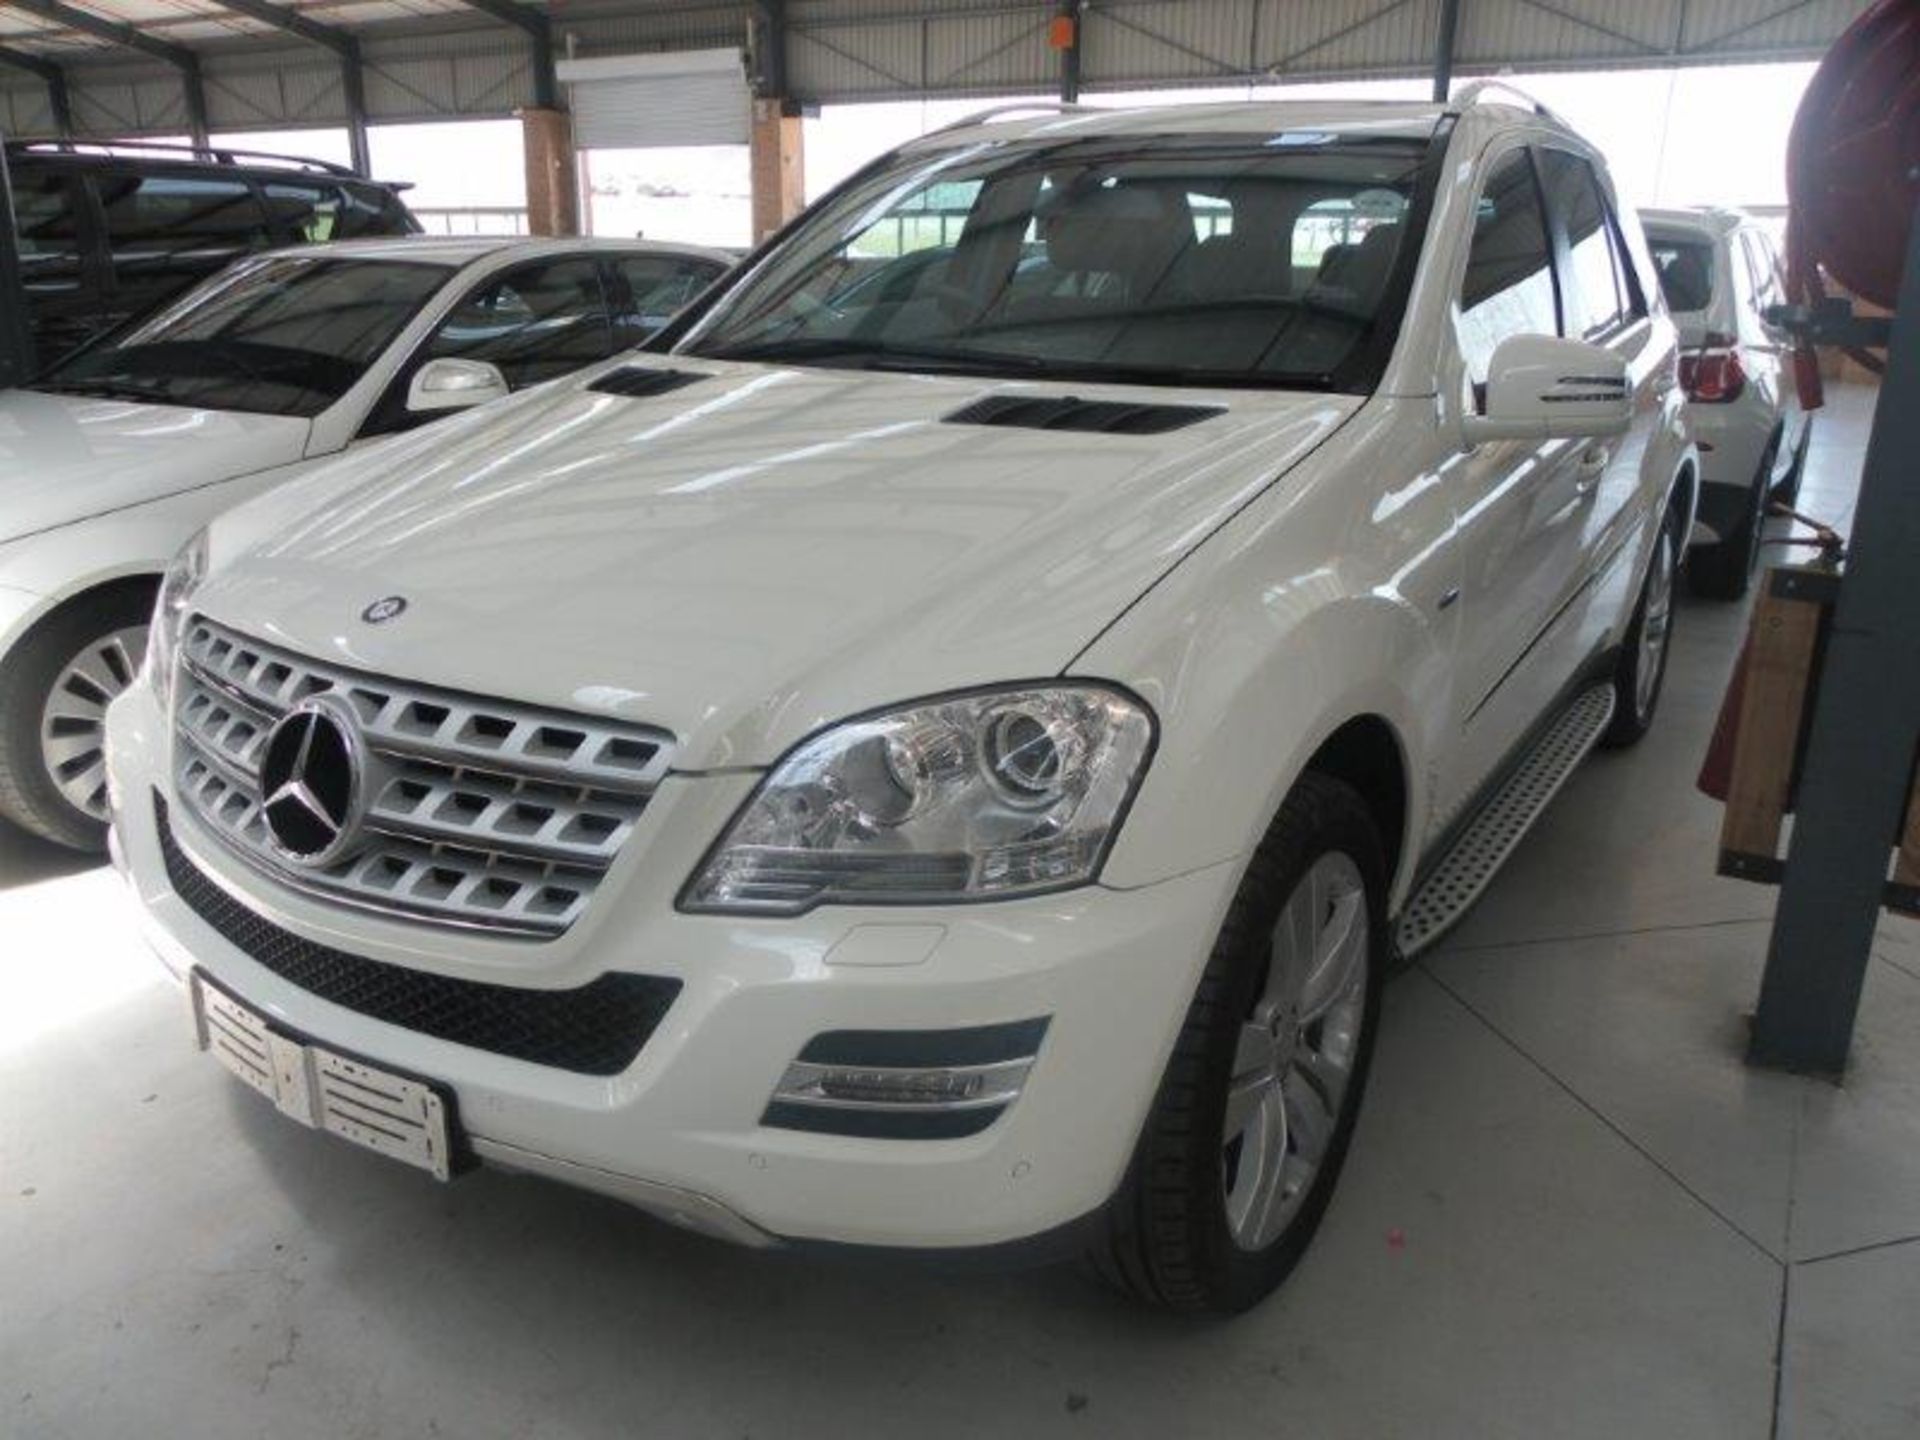 2011 MADOSINFS Mercedes-Benz ML350 CDI 4Matic (Vin No: WDC1641222A656827 )(50023 kms) Suggested